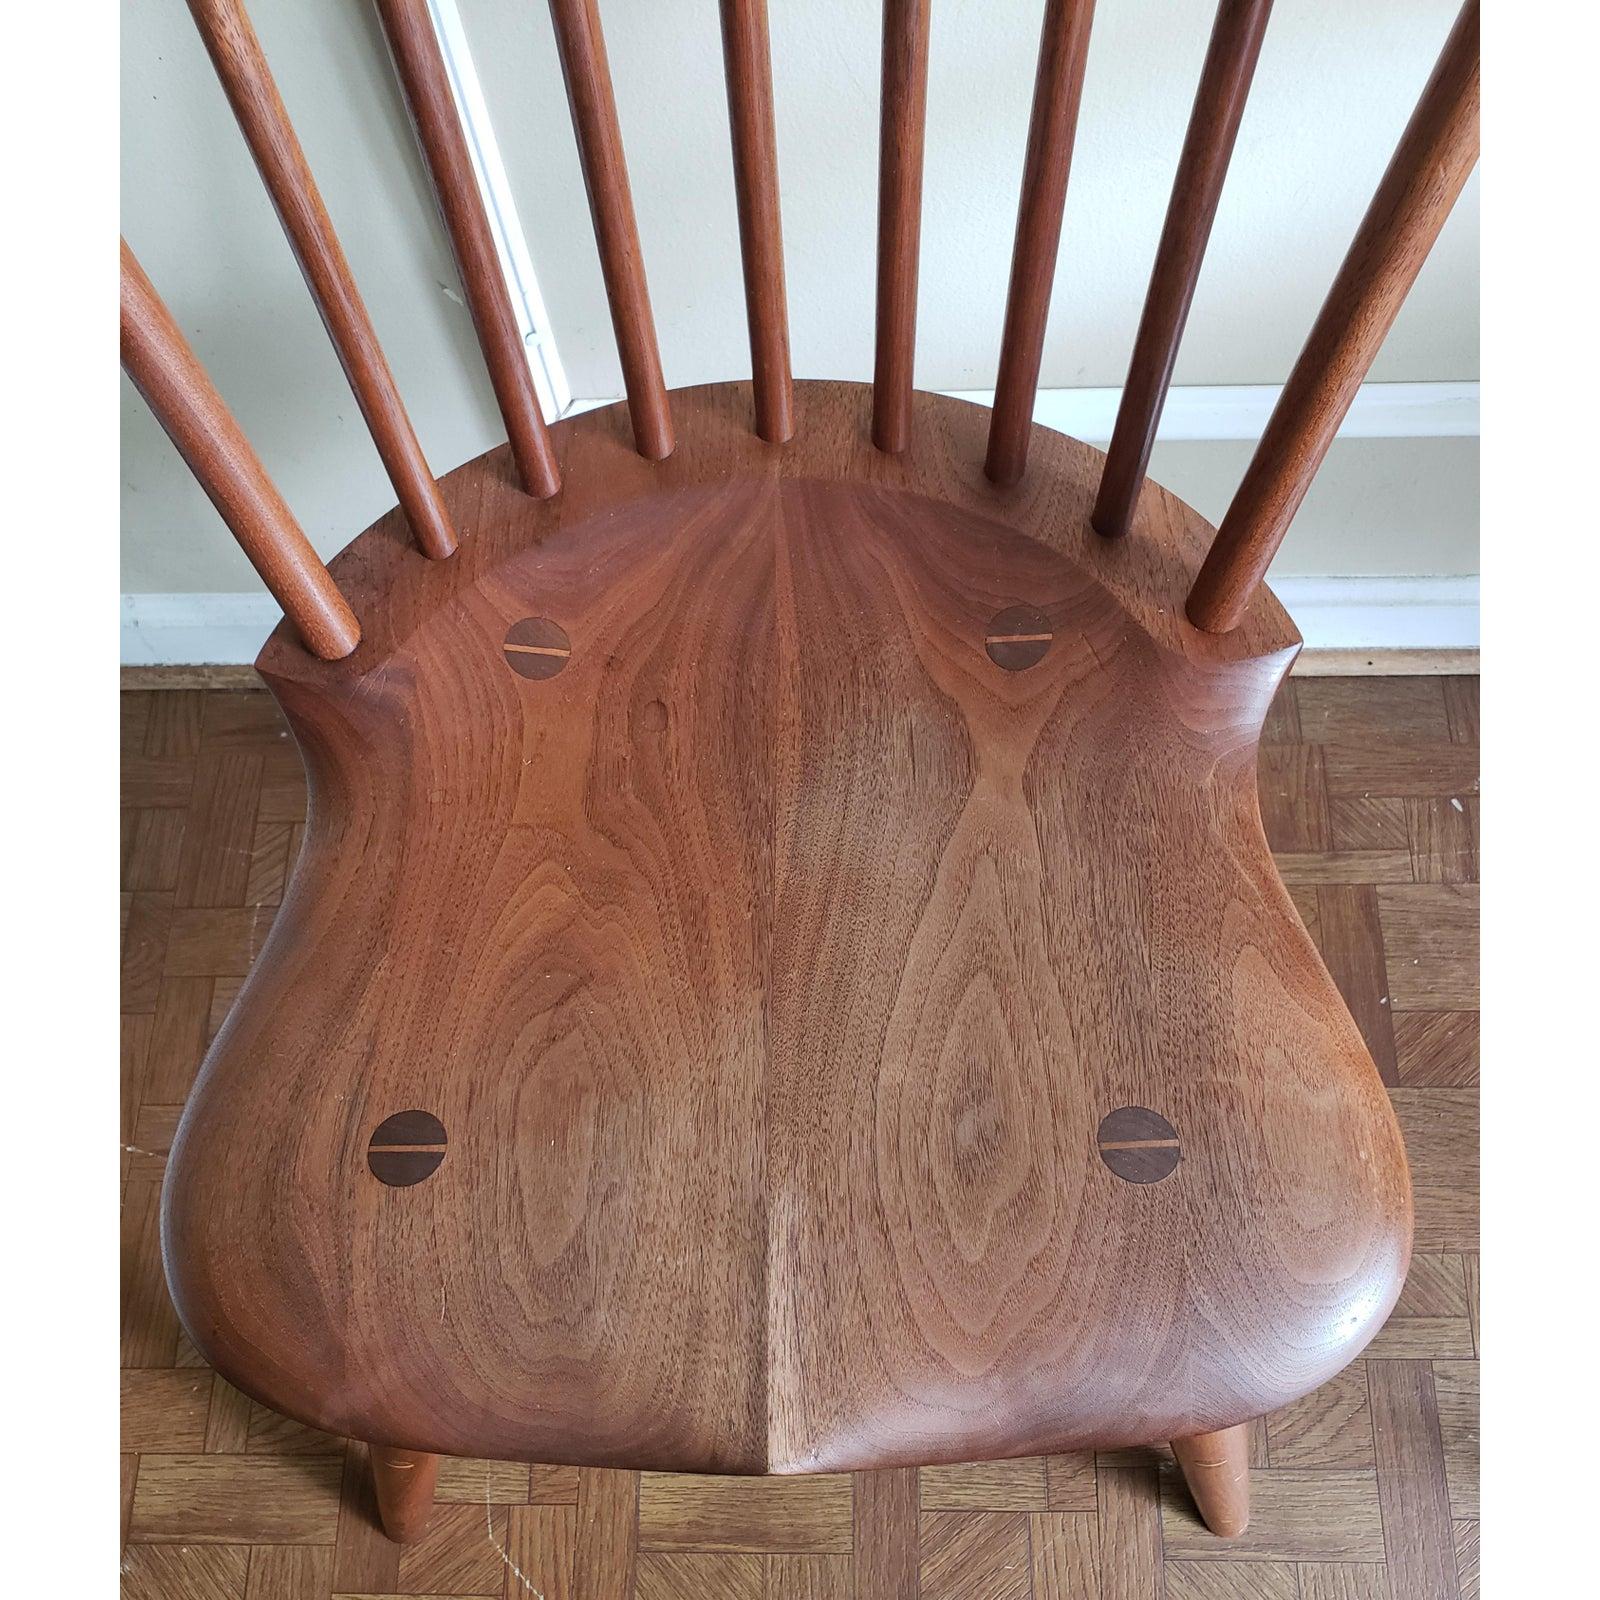 JOs Custom Walnut Windsor side chair. Excellent condition. Vintage of 1970s. Hand rubbed finshed throughout. Measures 17